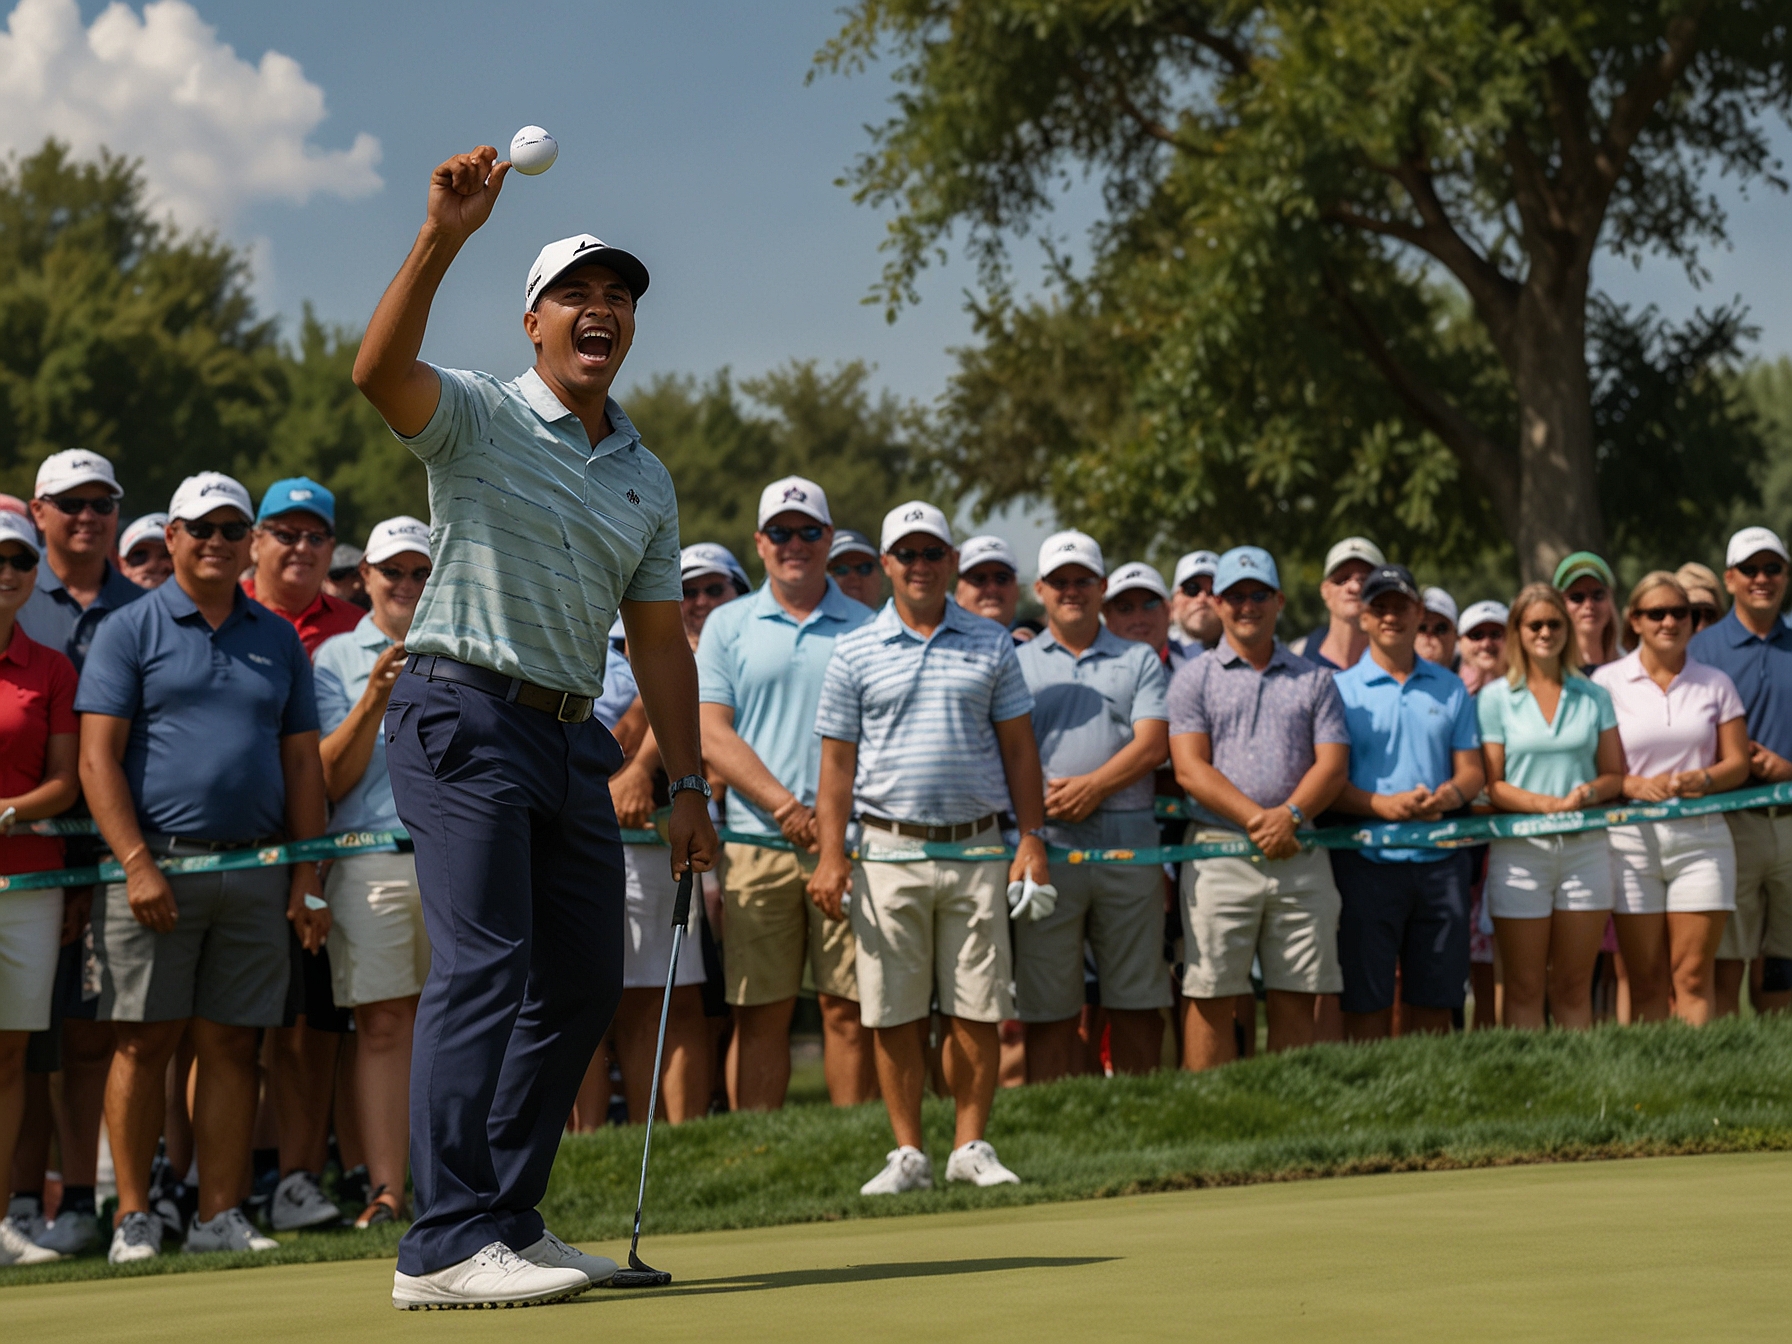 Fans cheer enthusiastically as Akshay Bhatia sinks a clutch putt, demonstrating his exceptional control and calm under pressure during the Rocket Mortgage Classic.